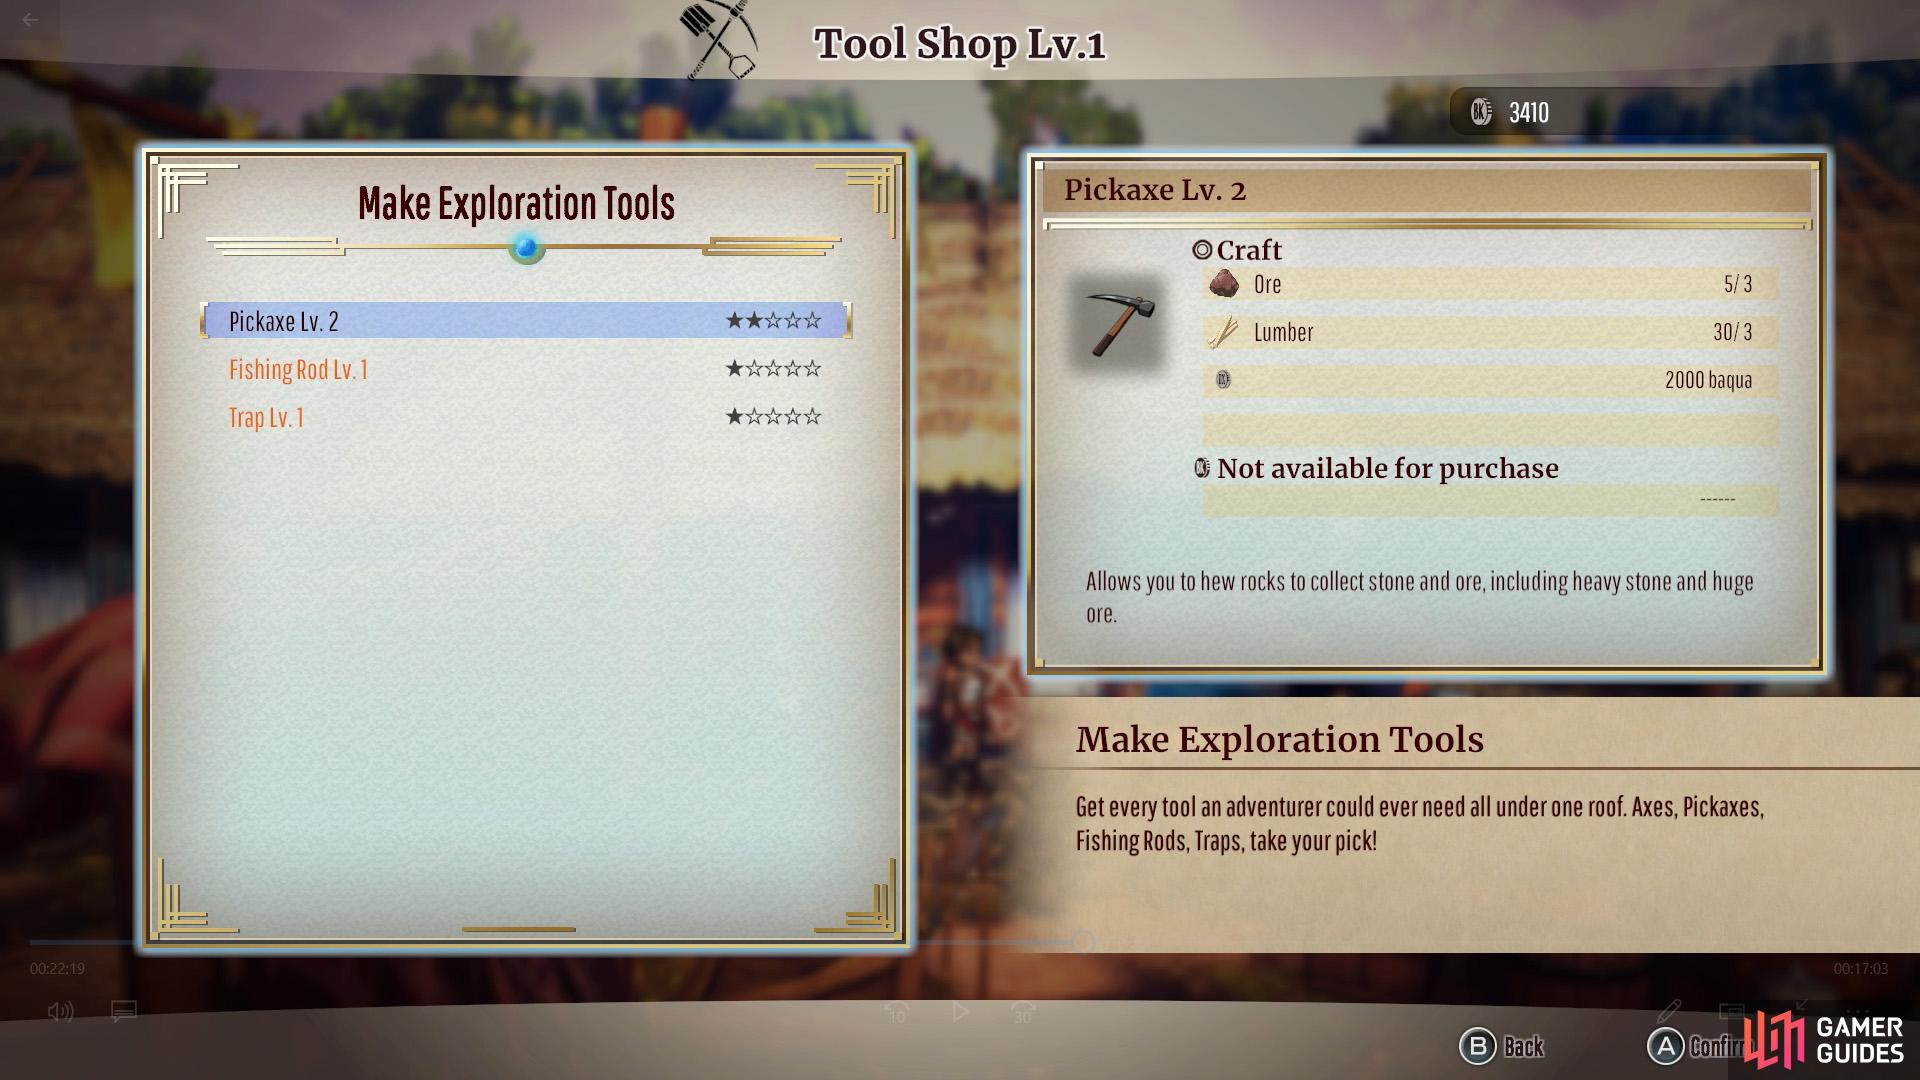 Upgrading your Pickaxe will improve the rarity of your ore.